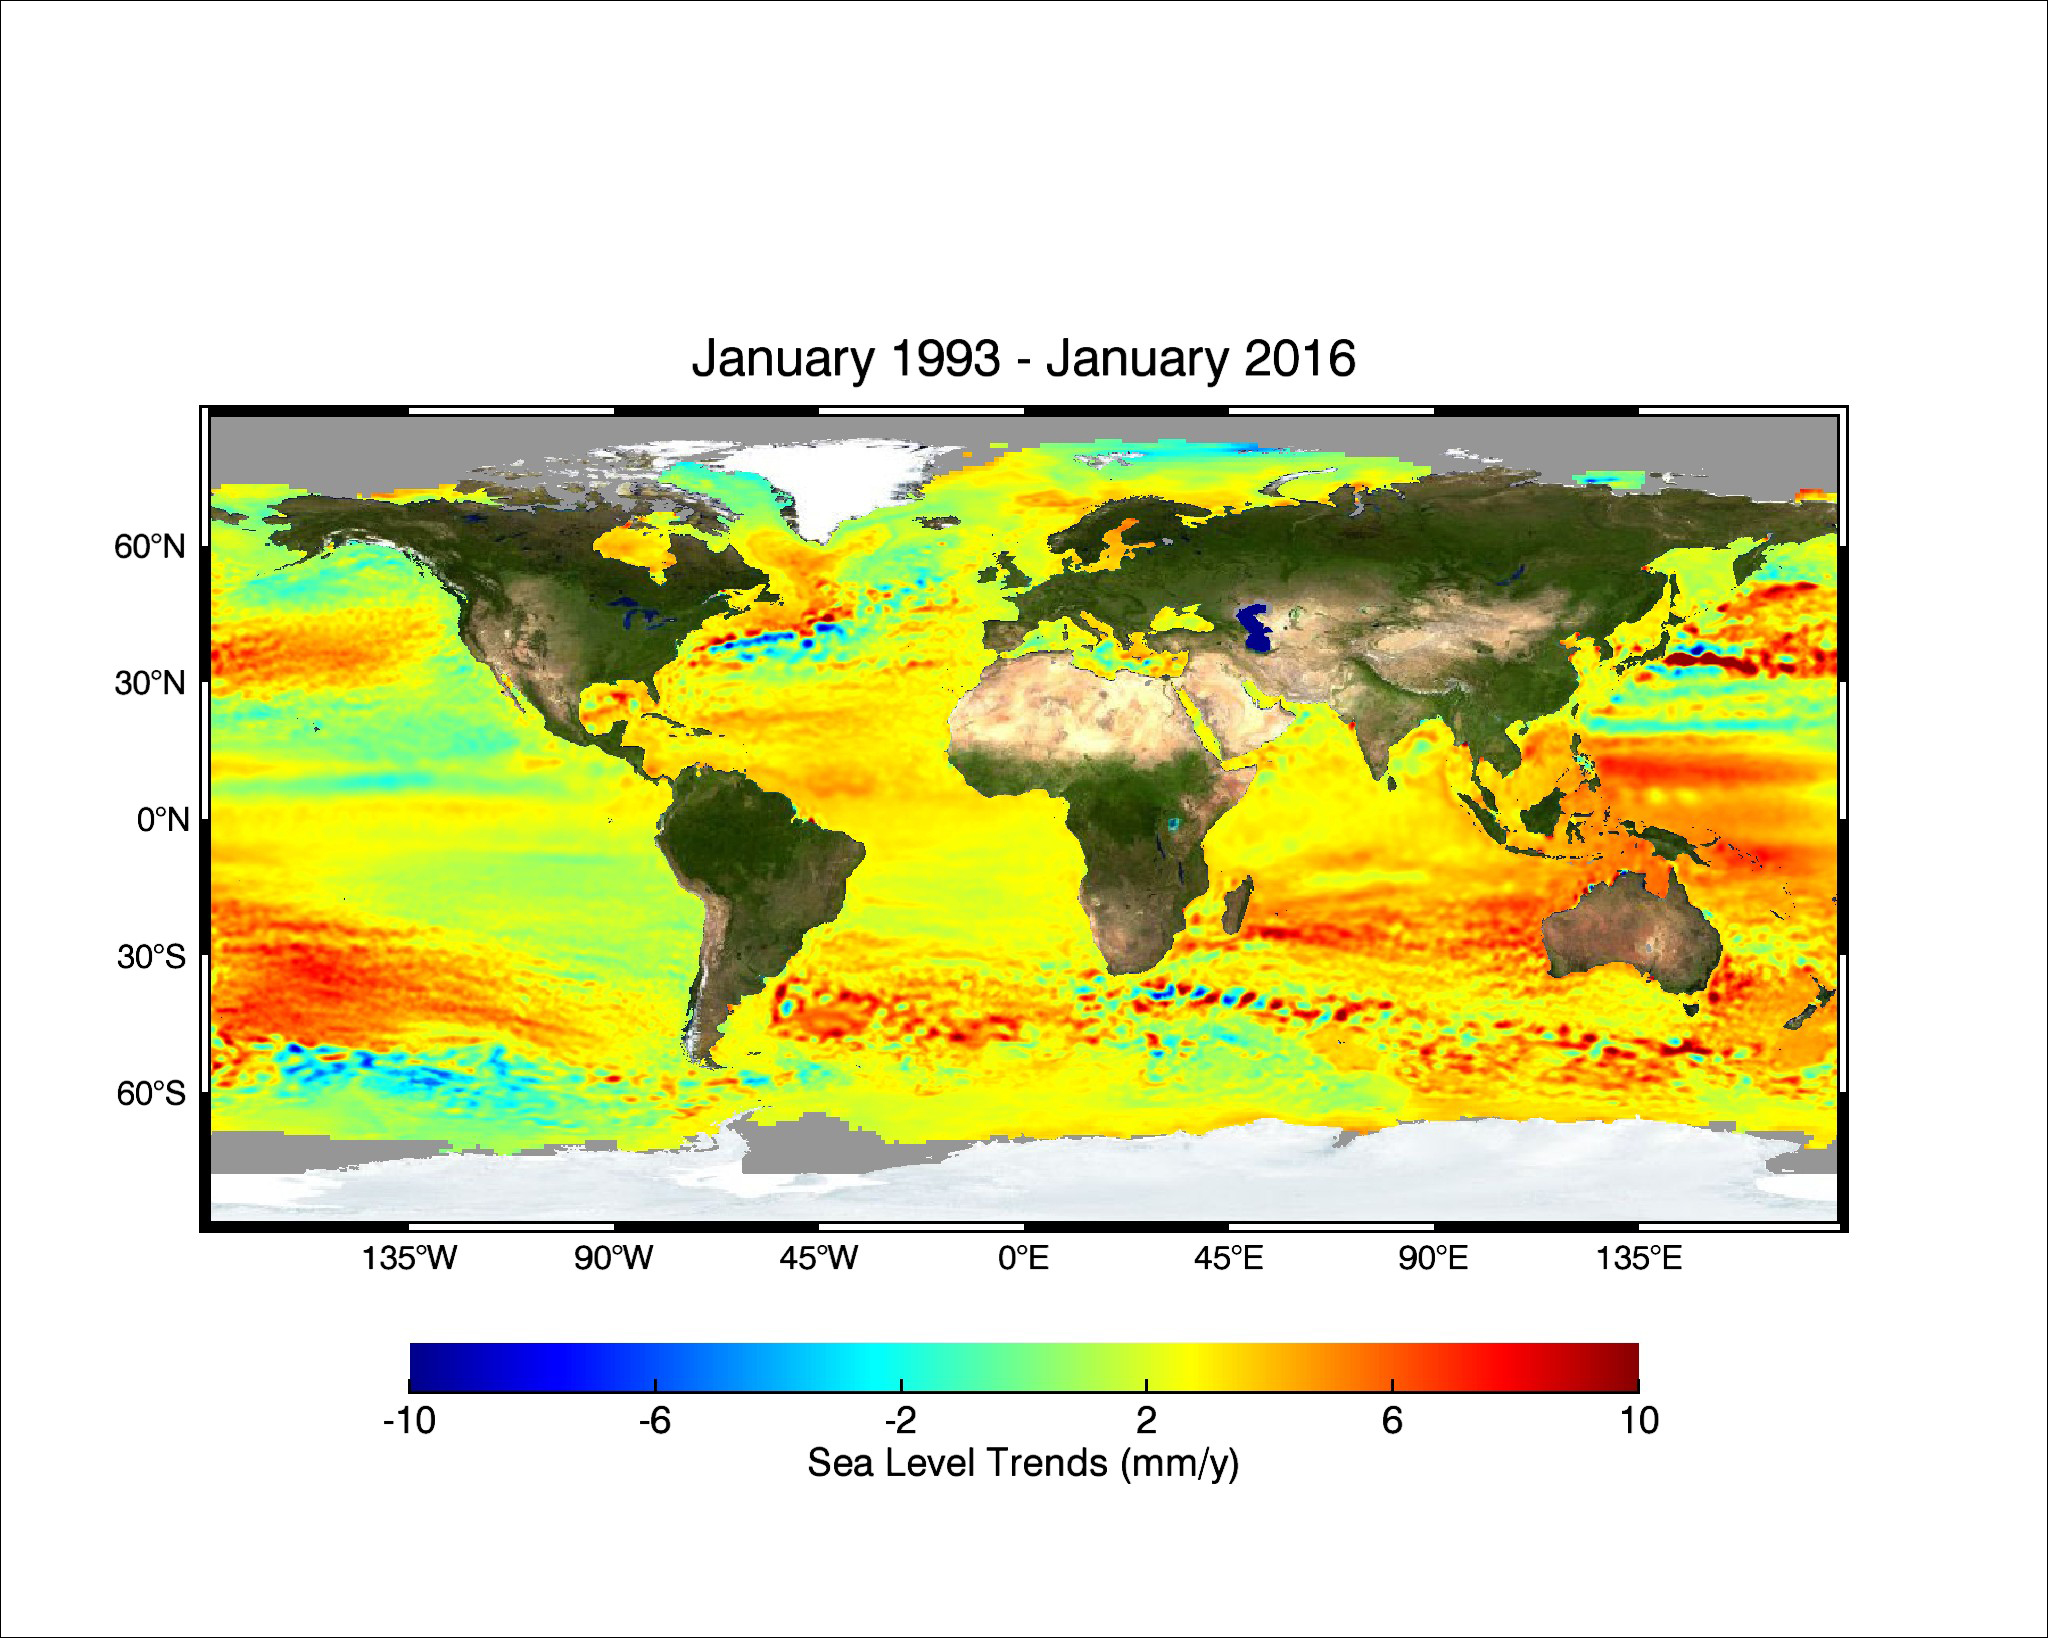 23-year trend of rising seas across the globe from 1993 to 2016